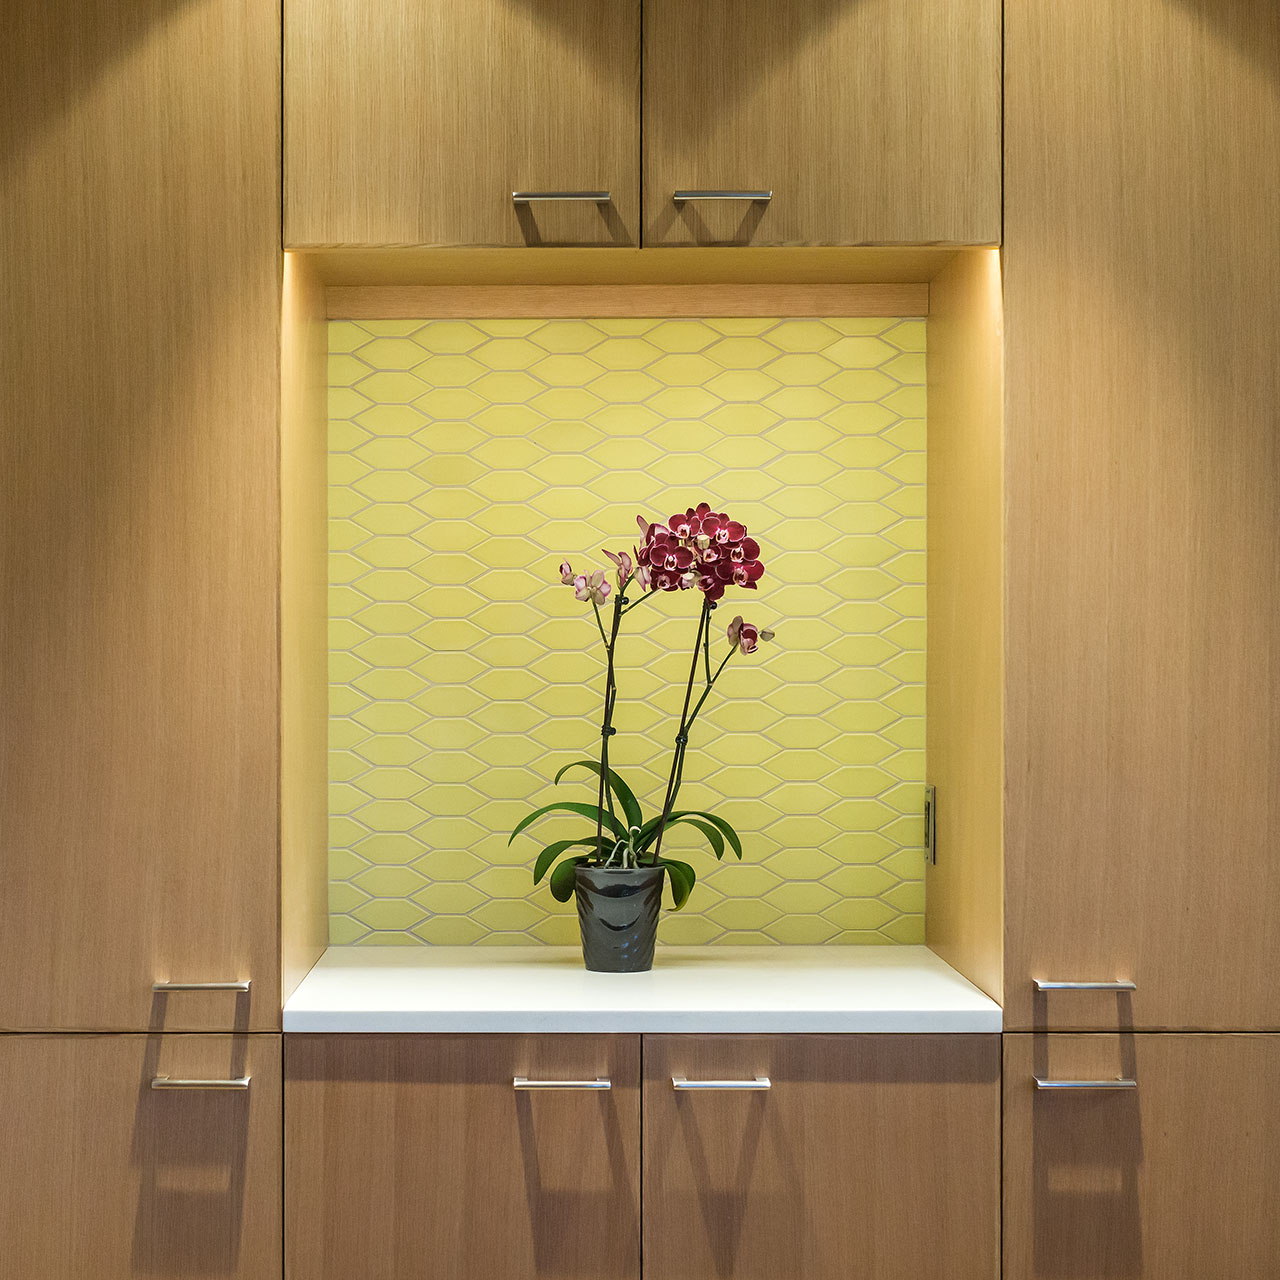 A niche in the cabinetry features a tiled backsplash and offers a place to display an orchid plant at the Alameda Update.